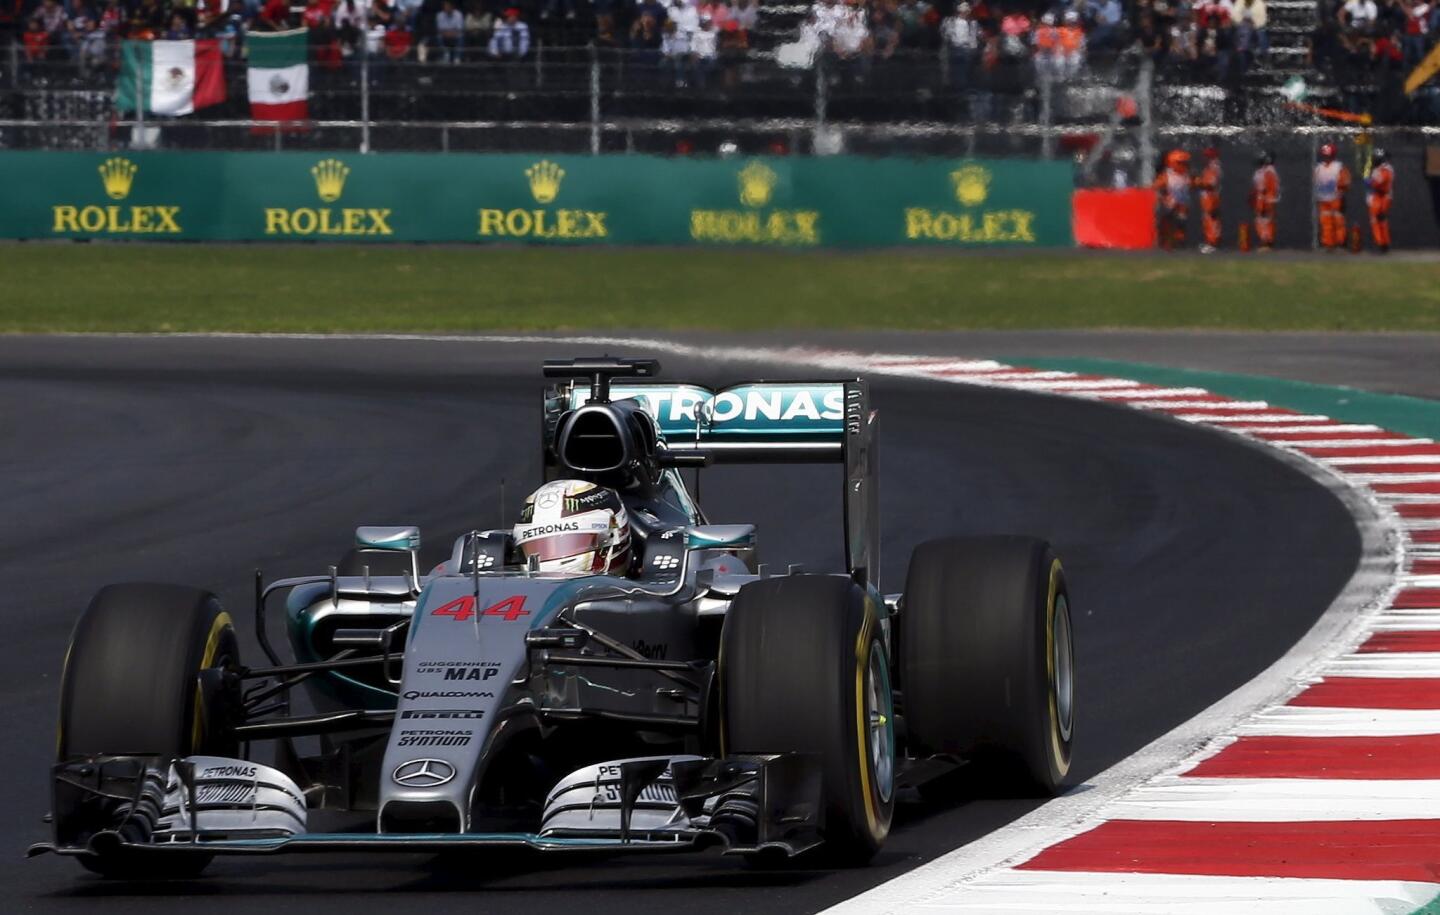 Mercedes Formula One driver Lewis Hamilton of Britain drives during the Mexican F1 Grand Prix at Autodromo Hermanos Rodriguez in Mexico City